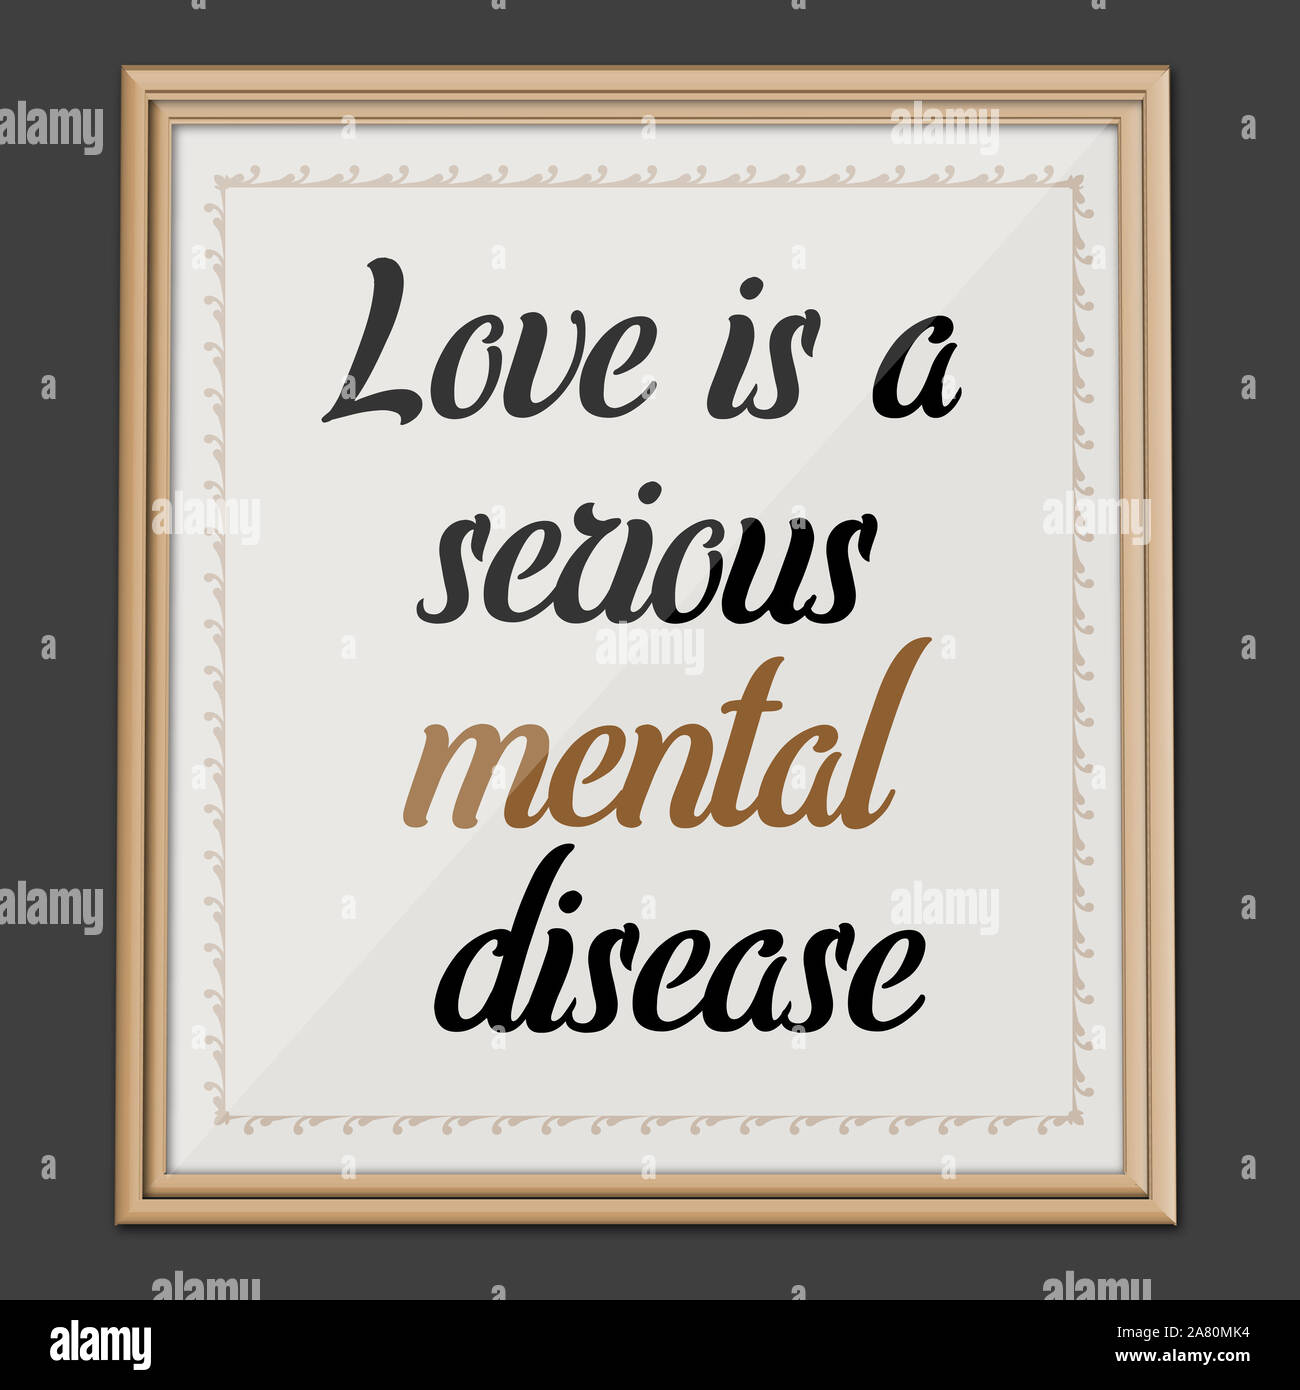 Love is Serious Mental Disease. Motivation and Inspirational Quote Wall art Poster Stock Photo